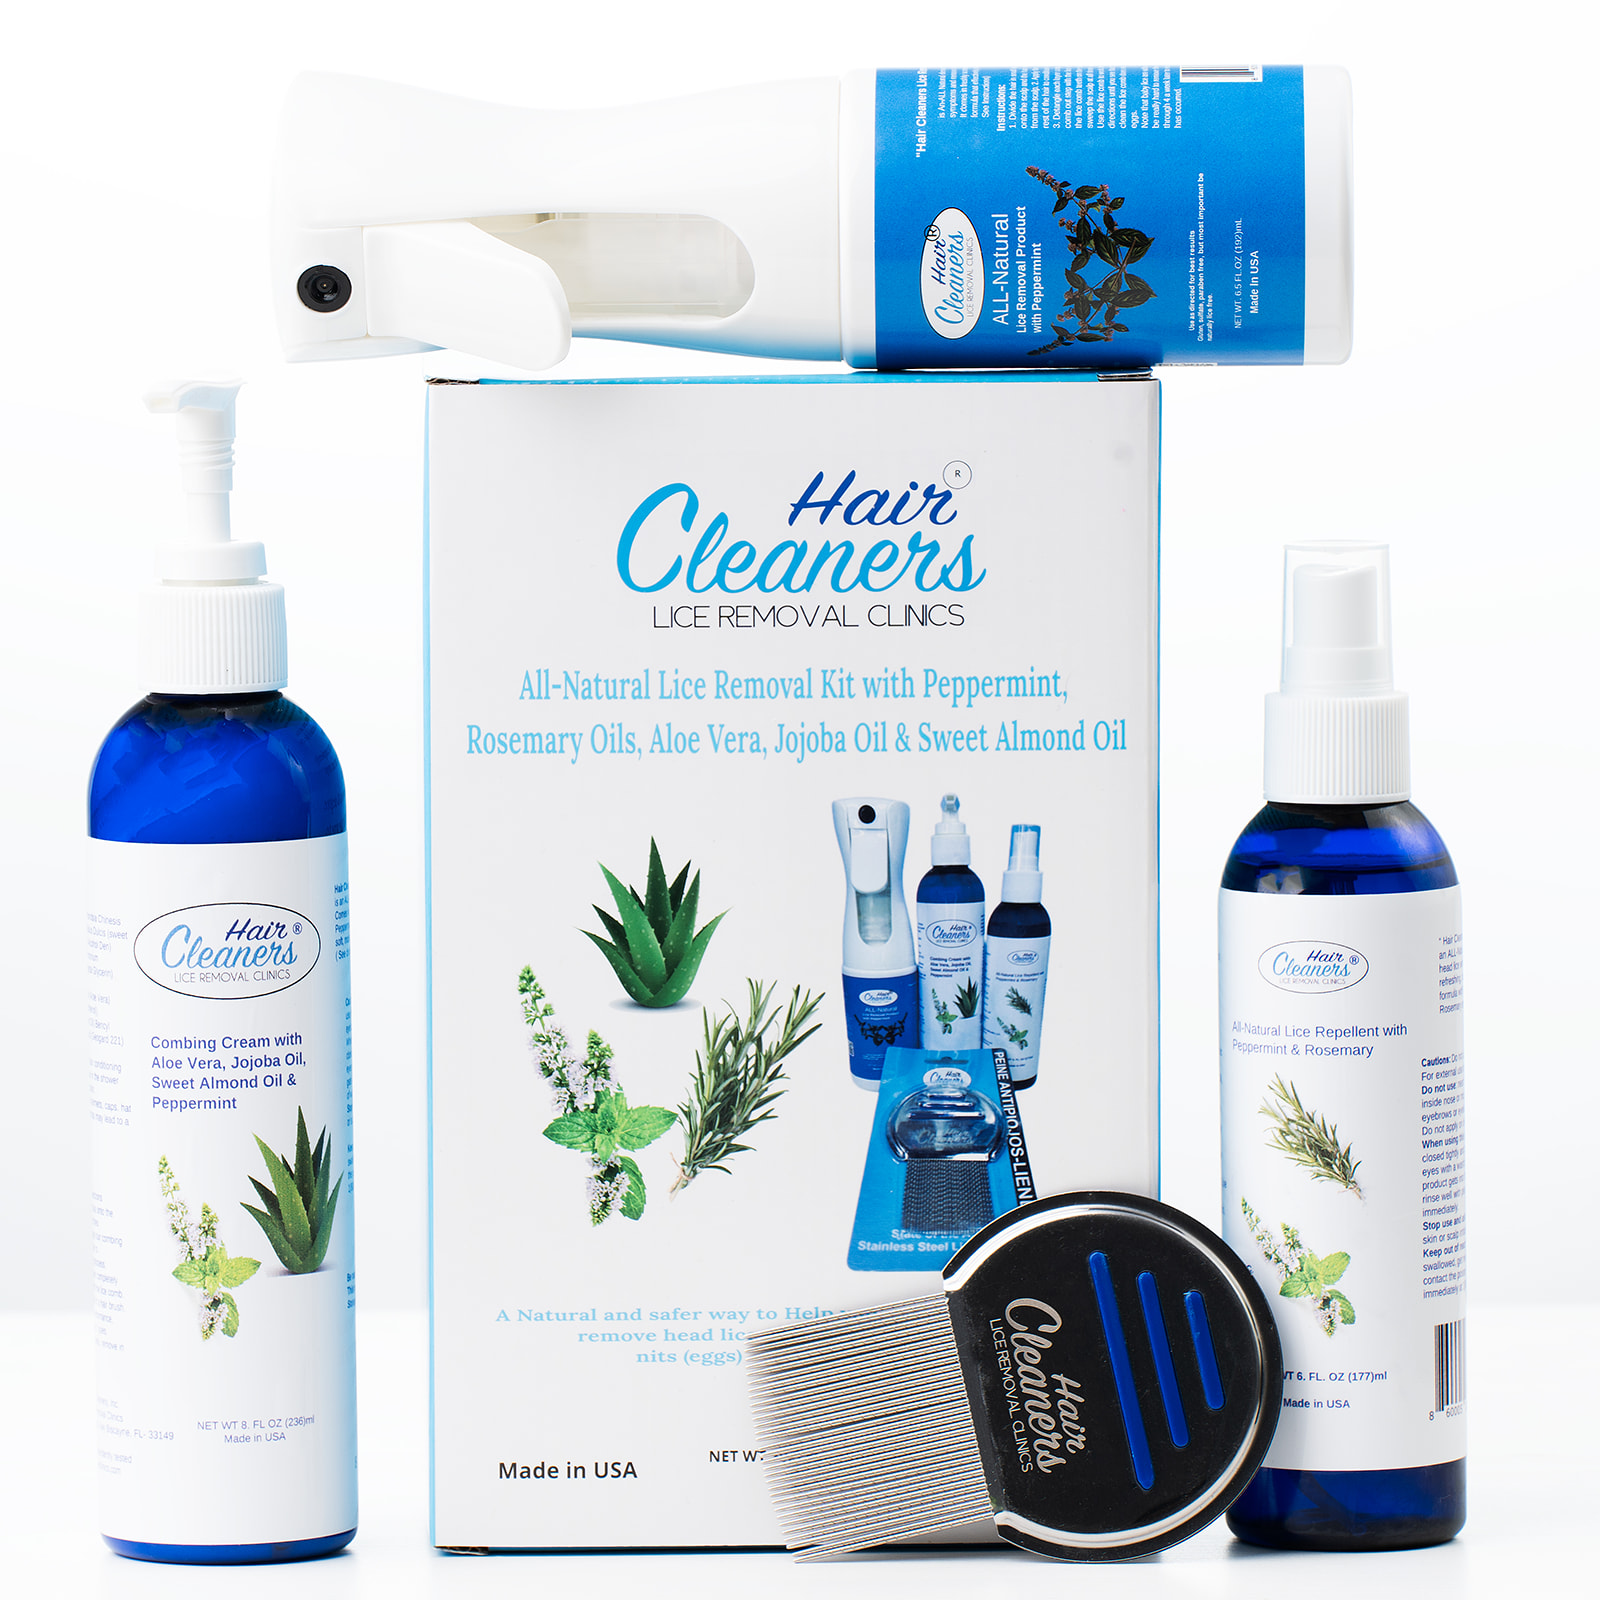 Hair Cleaners Lice treatment kit